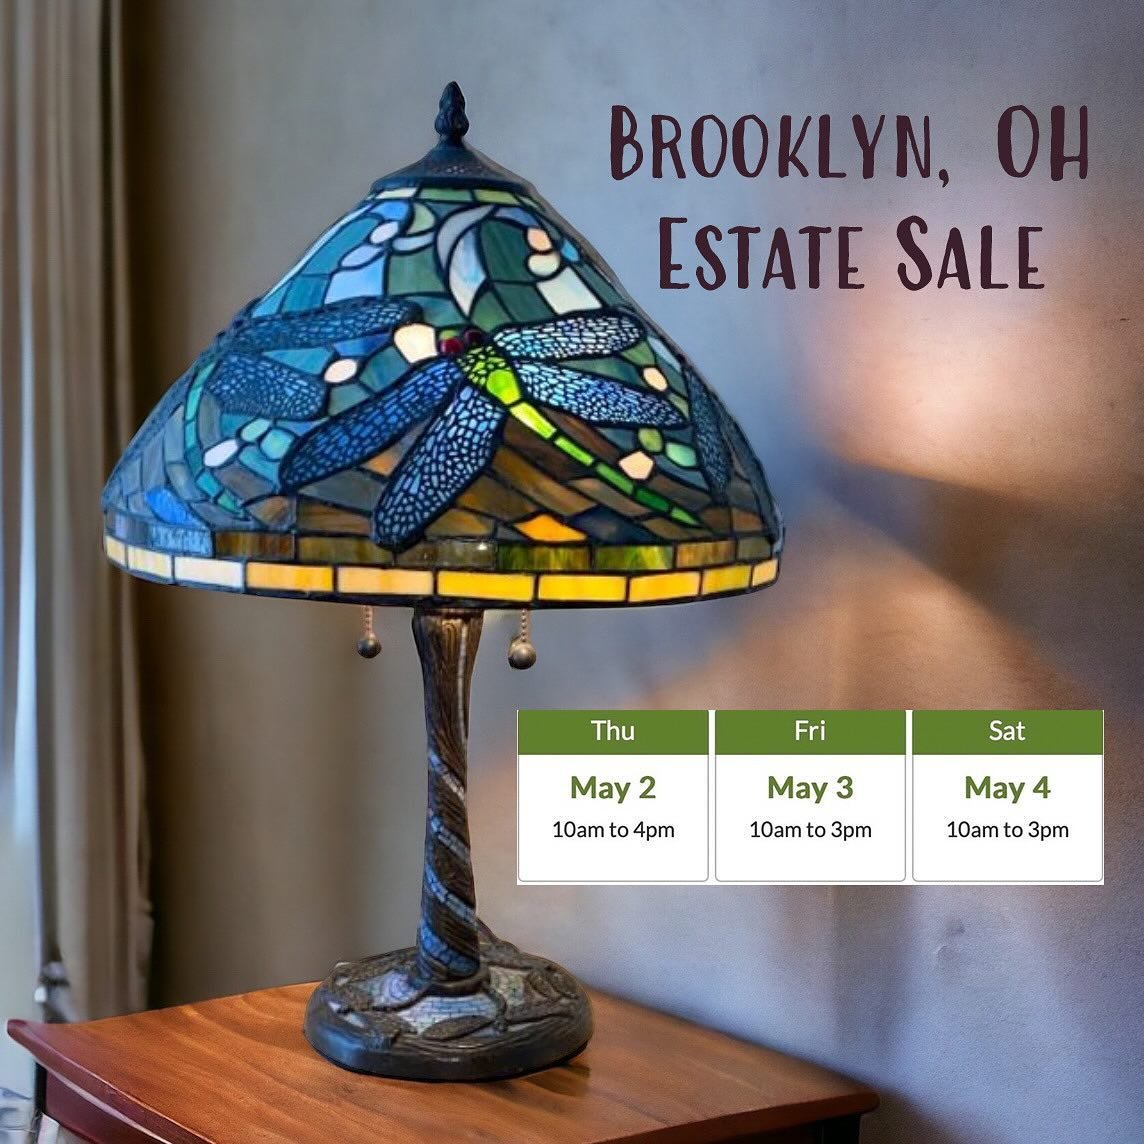 SAVE THE DATE! Make sure to add this 3 day Brooklyn neighborhood/ Cleveland OH 44144 estate sale on your calendar! It will start 5/2/2024.  The address will be posted after 9am on 5/1/2024.
Check out estatesales.net for more details and photos. 
Link